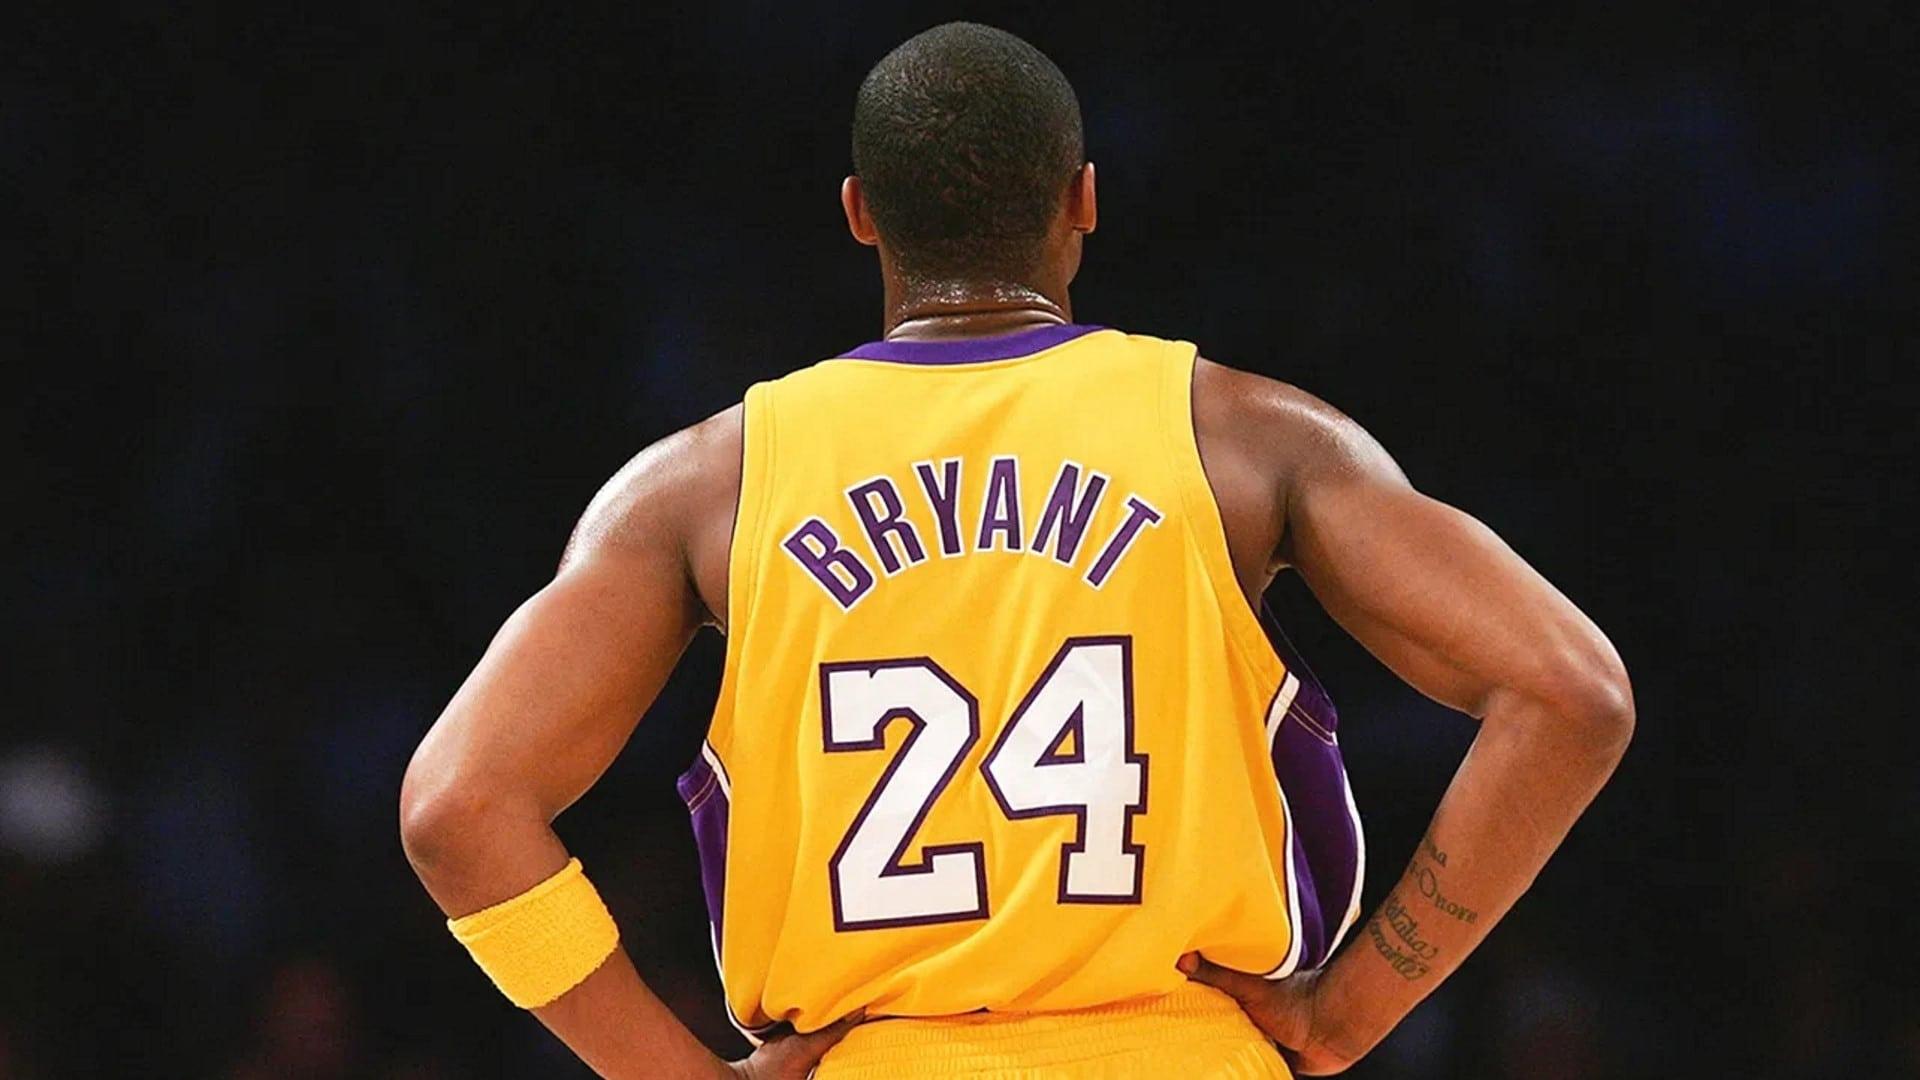 Kobe Bryant: The Death of a Legend backdrop